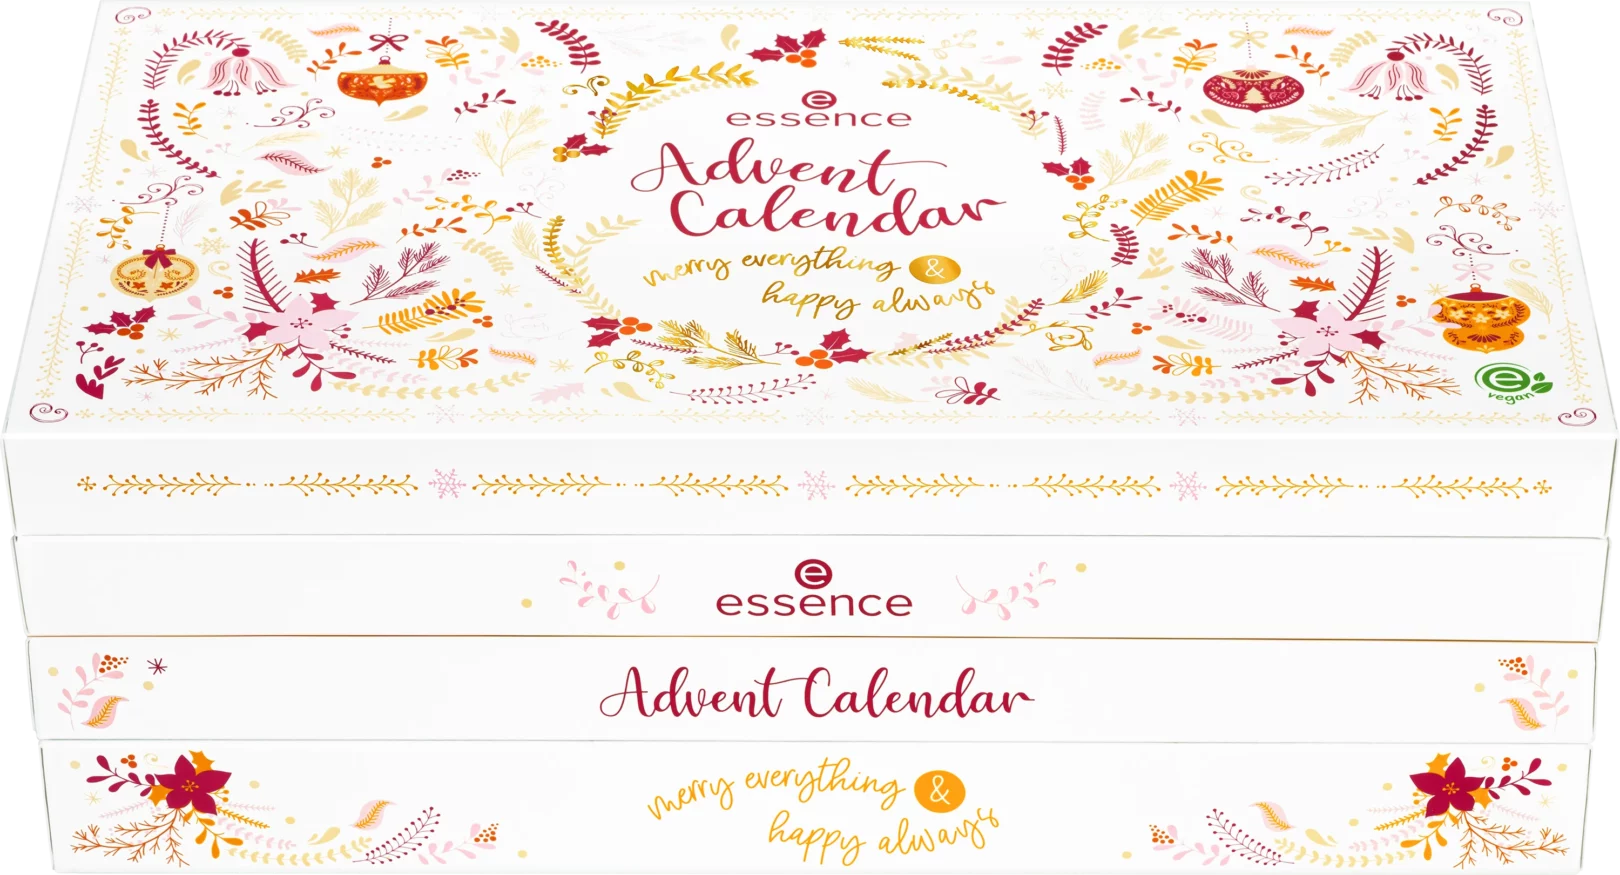 Essence Merry Everything & Happy Always calendrier de l'Avent